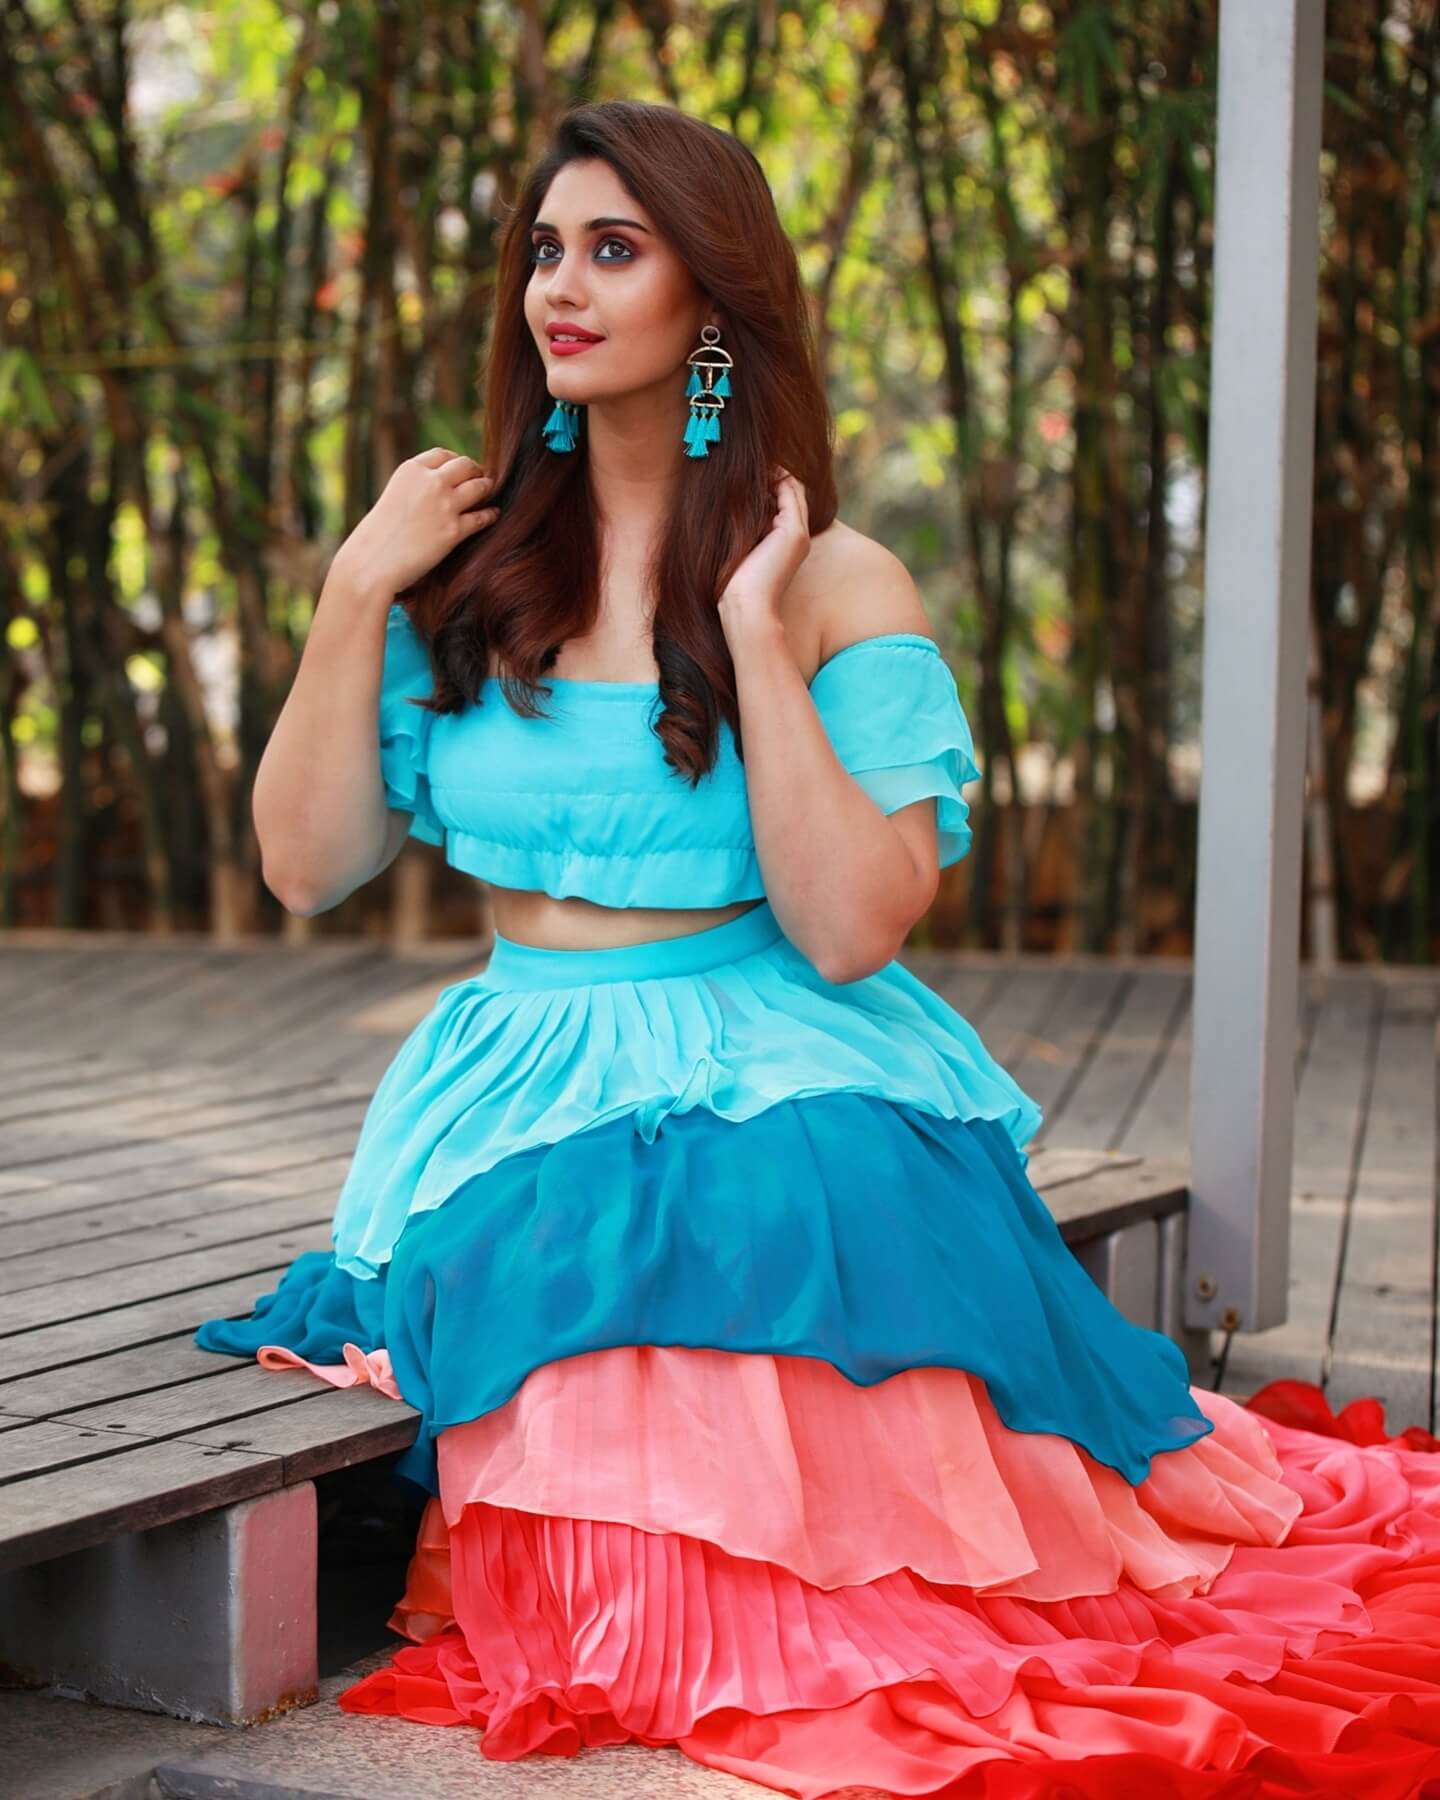 Surbhi Puranik Vibrant & Peppy Look In Blue & Peach Multilayer Skirt Paired With Blue Off-Shoulder Crop Top